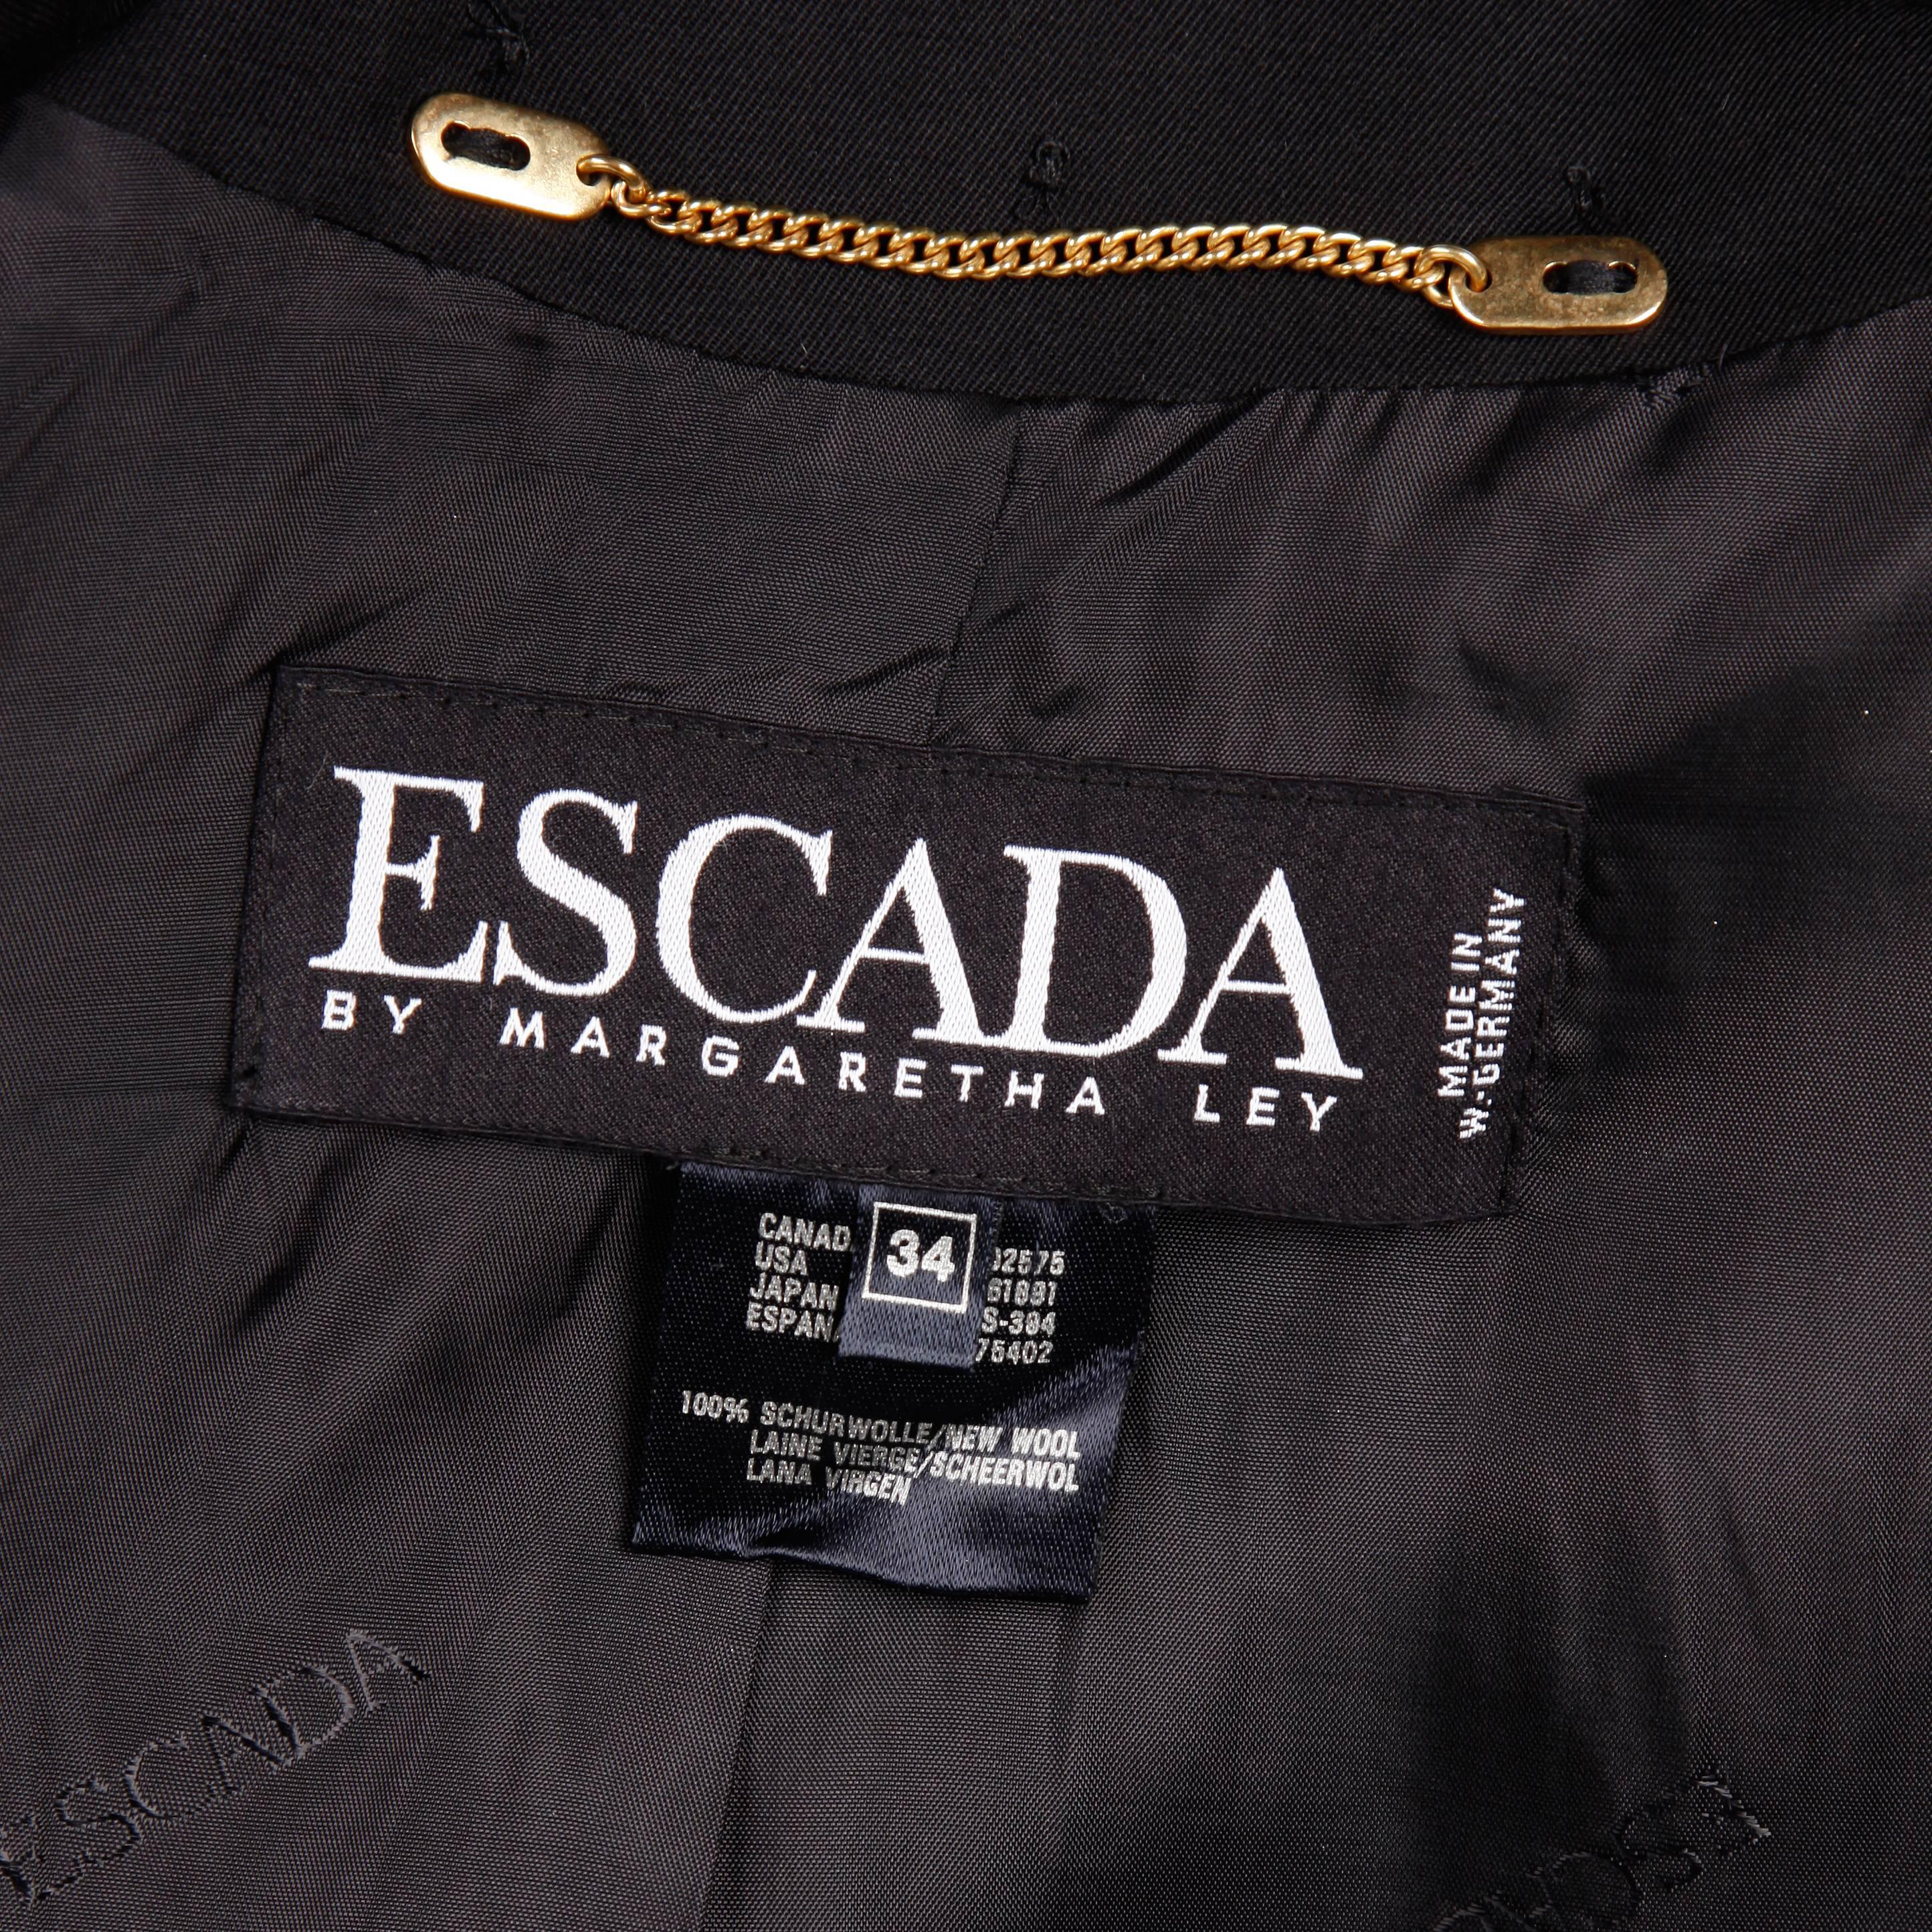 Amazing vintage black wool jacket with big gold studs by Escada. Fully lined with no closure (hangs open). 100% Wool. Marked size is an EU 34 and the jacket fits like a modern size small. The bust measures 35